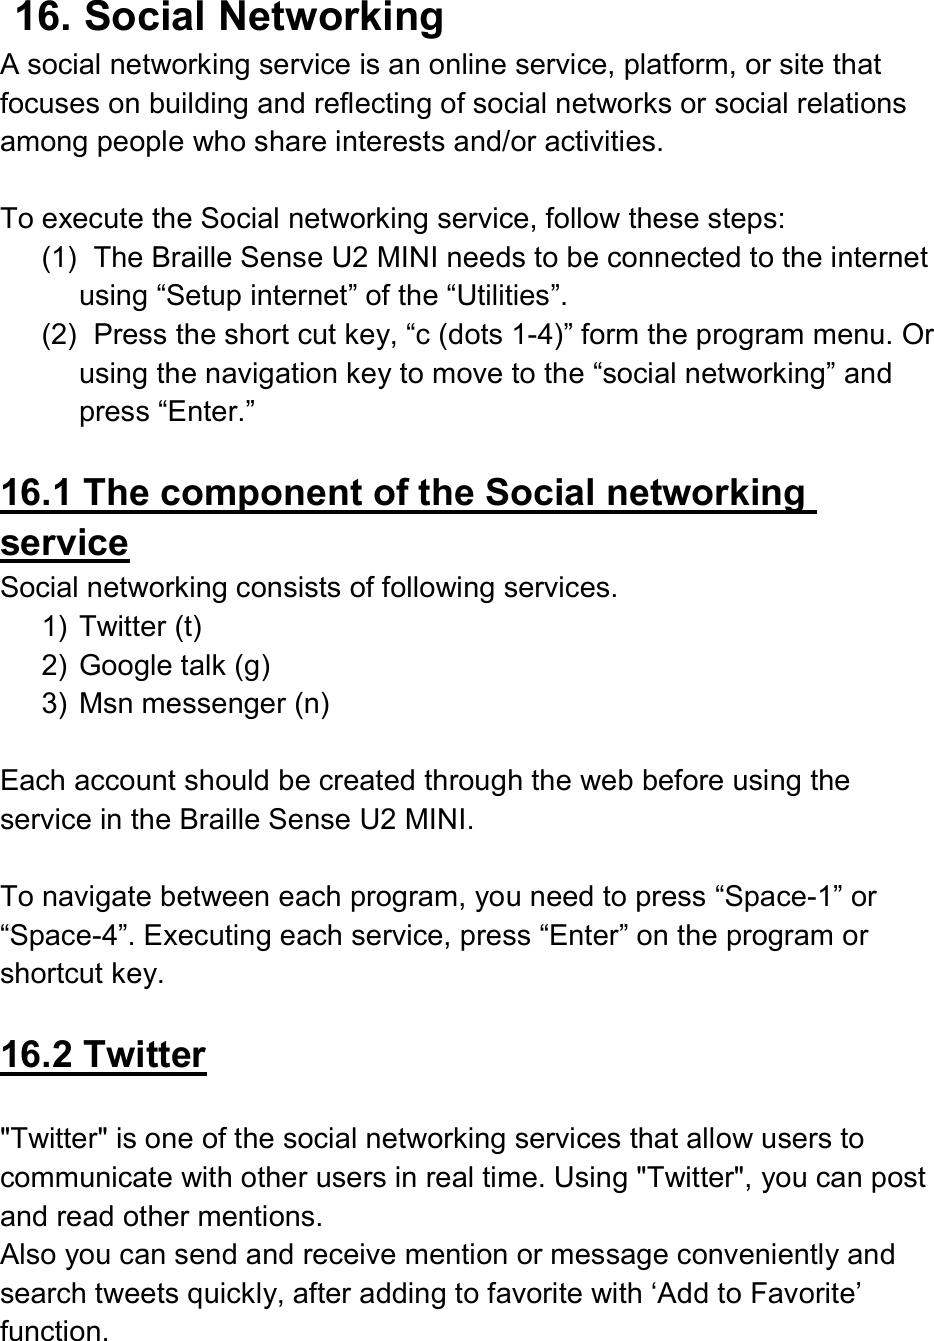  16. Social Networking A social networking service is an online service, platform, or site that focuses on building and reflecting of social networks or social relations among people who share interests and/or activities.    To execute the Social networking service, follow these steps: (1)   The Braille Sense U2 MINI needs to be connected to the internet using “Setup internet” of the “Utilities”.   (2)   Press the short cut key, “c (dots 1-4)” form the program menu. Or using the navigation key to move to the “social networking” and press “Enter.”    16.1 The component of the Social networking service Social networking consists of following services. 1)  Twitter (t) 2)  Google talk (g) 3)  Msn messenger (n)  Each account should be created through the web before using the service in the Braille Sense U2 MINI.    To navigate between each program, you need to press “Space-1” or “Space-4”. Executing each service, press “Enter” on the program or shortcut key.    16.2 Twitter  &quot;Twitter&quot; is one of the social networking services that allow users to communicate with other users in real time. Using &quot;Twitter&quot;, you can post and read other mentions.   Also you can send and receive mention or message conveniently and search tweets quickly, after adding to favorite with ‘Add to Favorite’ function.     